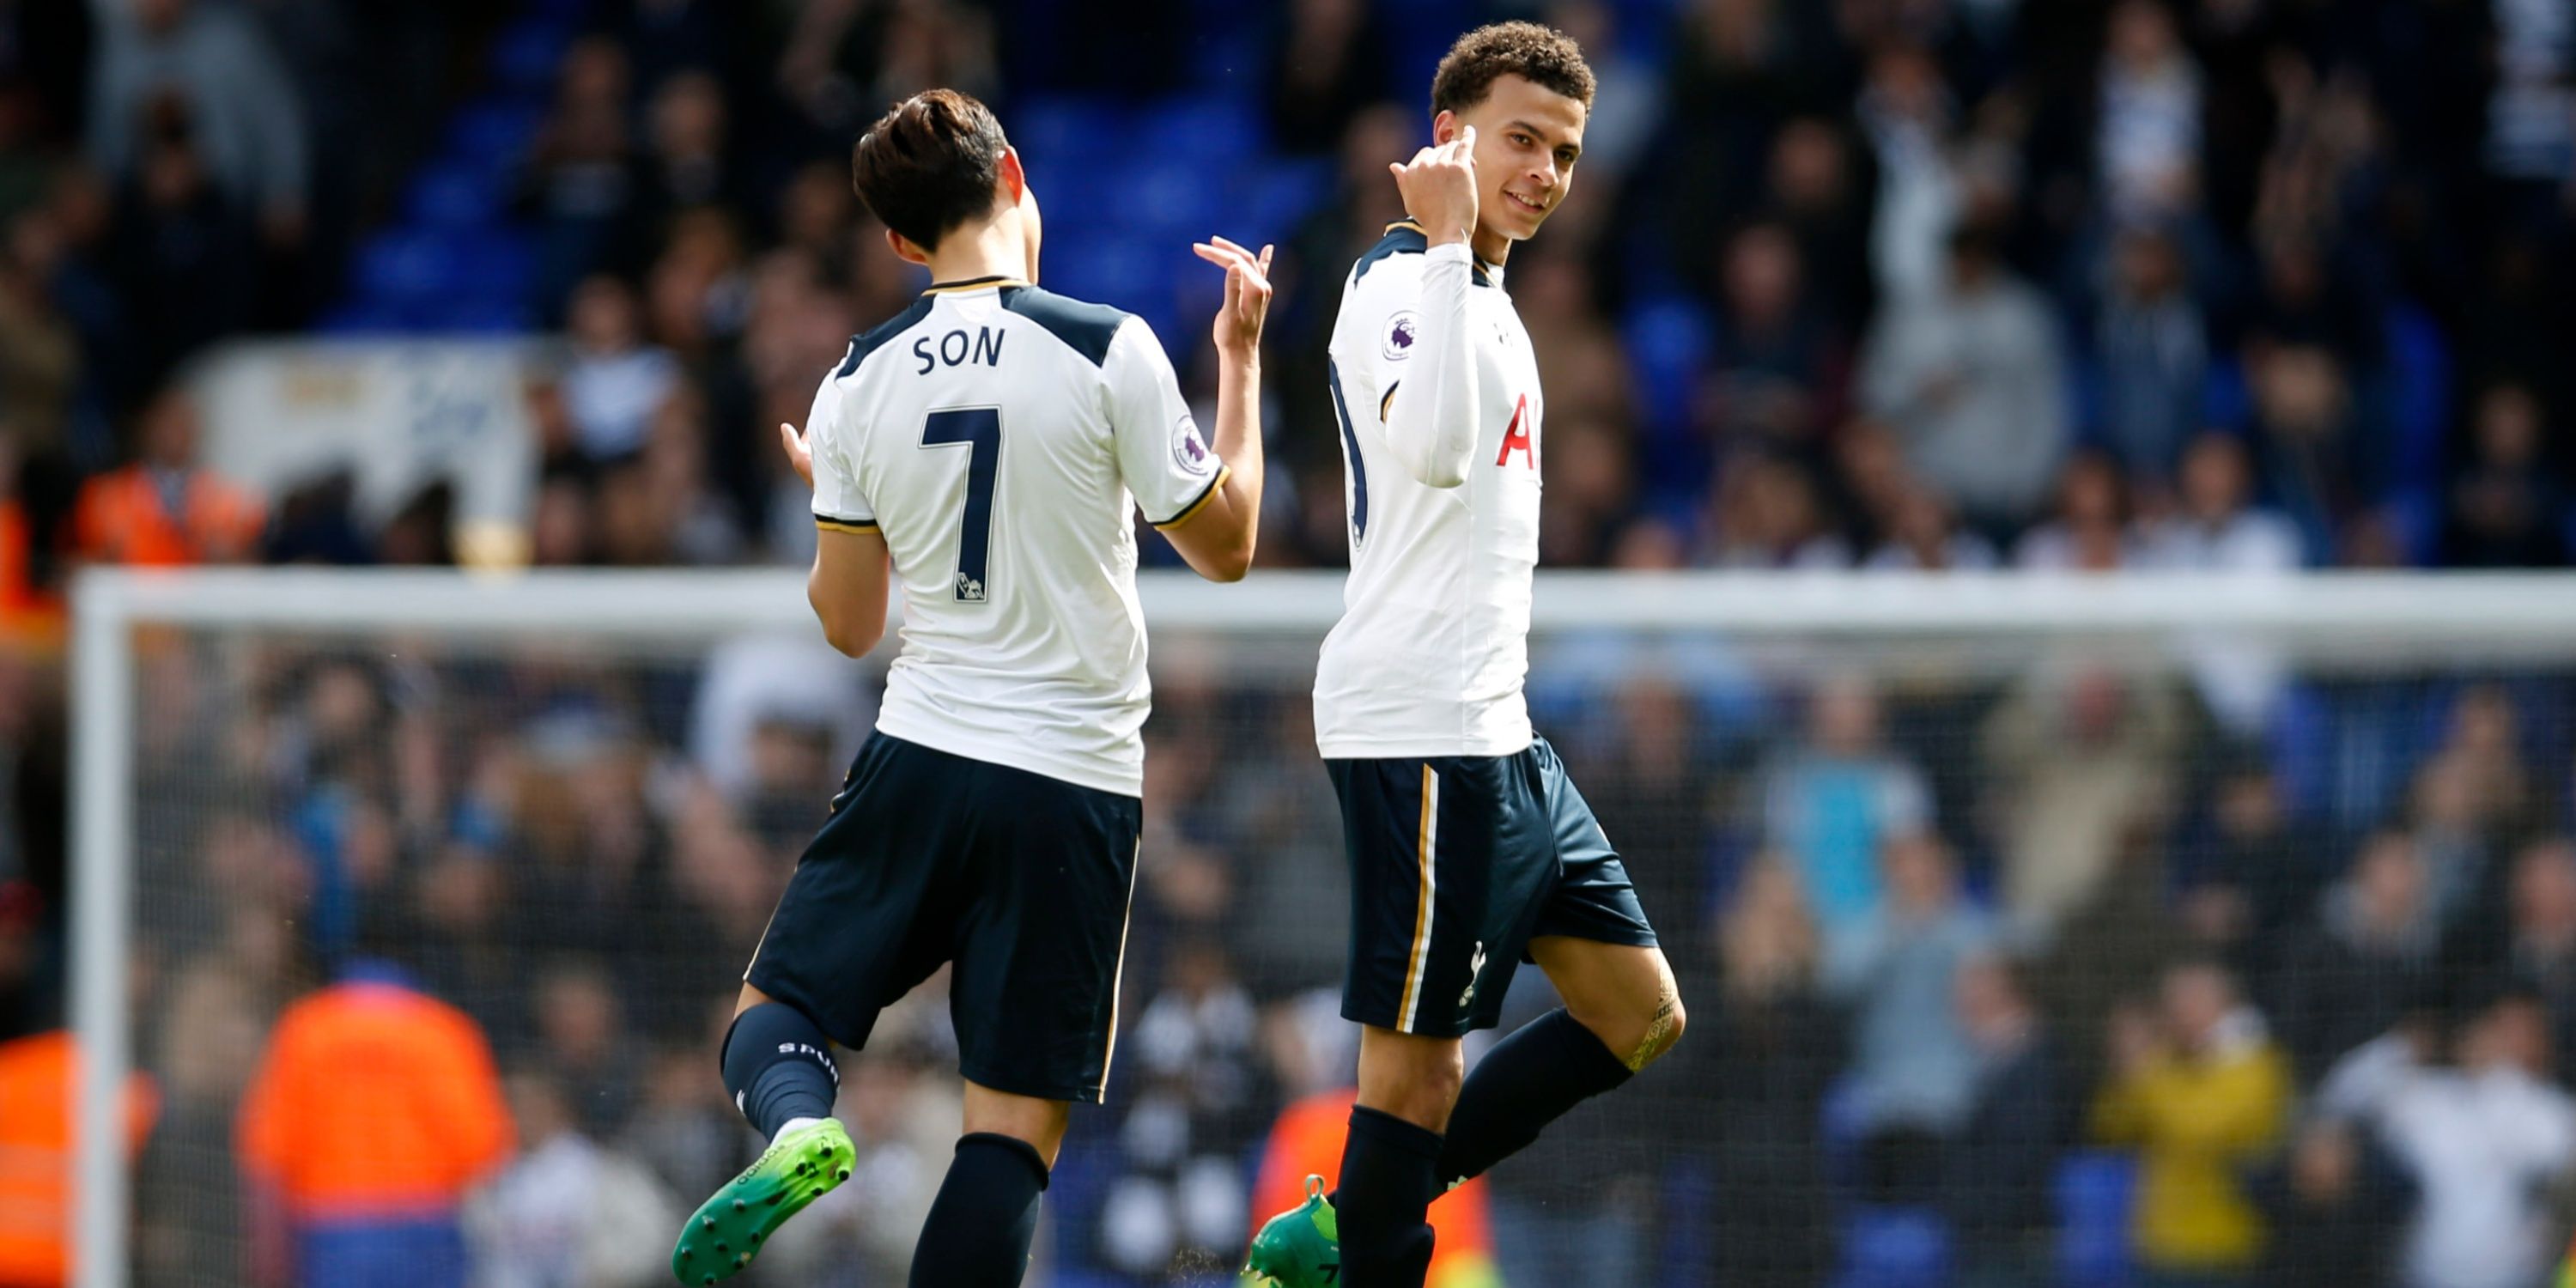 Heung-min Son and Dele Alli at Tottenham